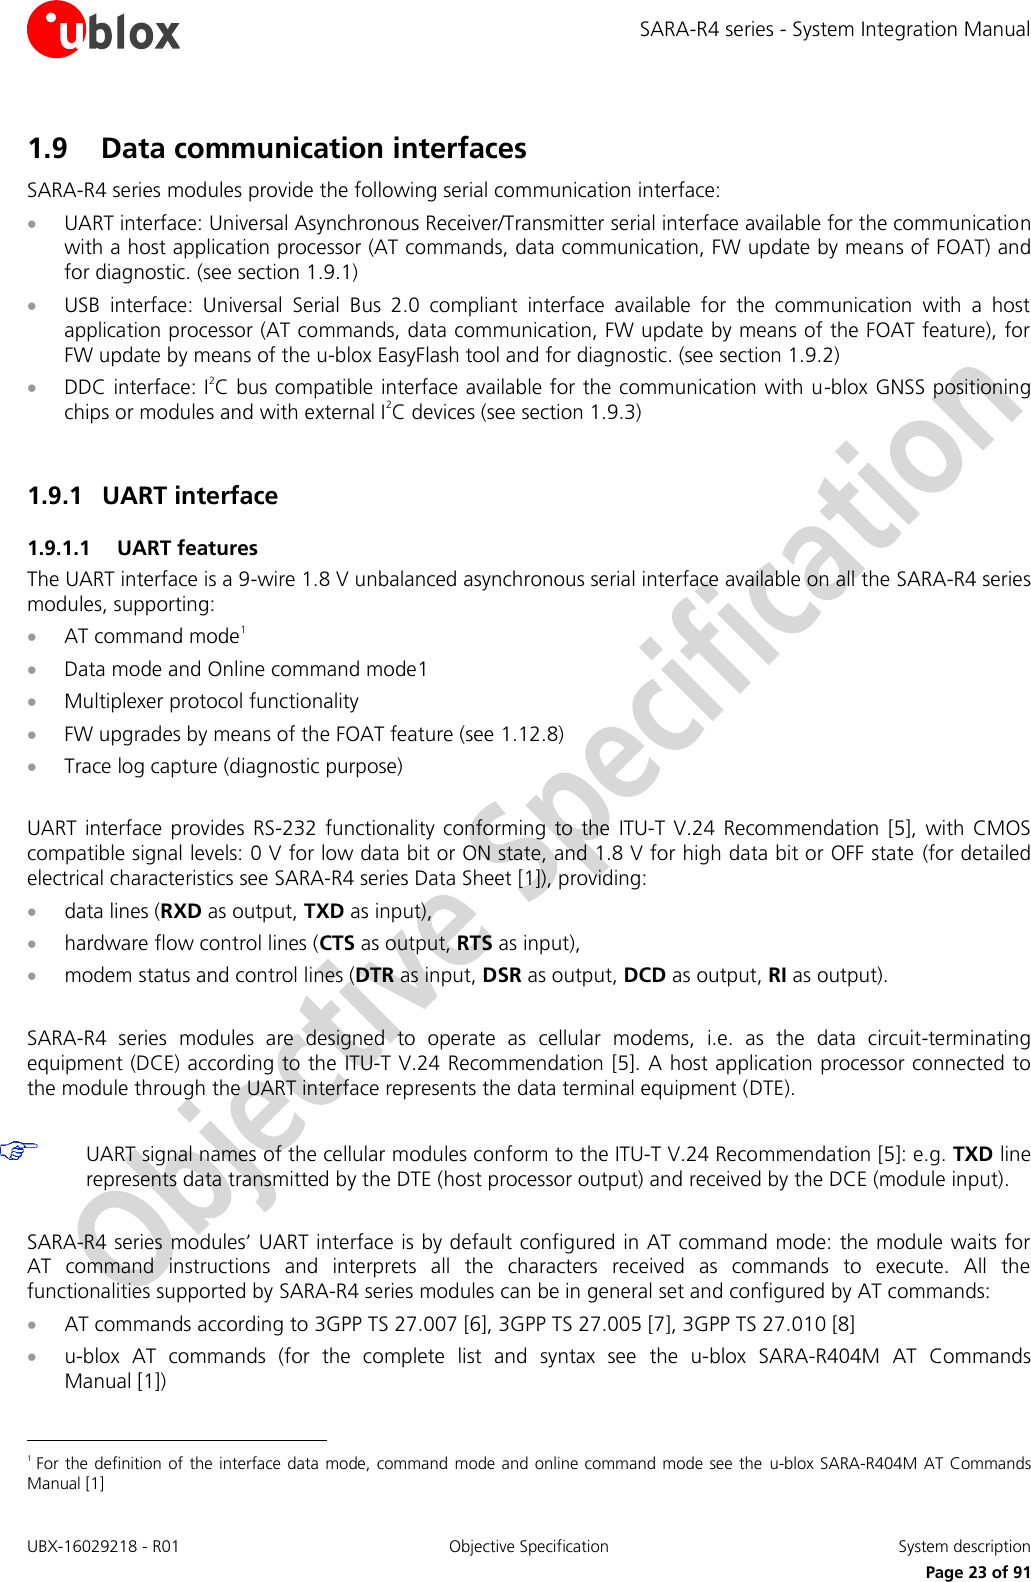 SARA-R4 series - System Integration Manual UBX-16029218 - R01  Objective Specification  System description     Page 23 of 91 1.9 Data communication interfaces SARA-R4 series modules provide the following serial communication interface:  UART interface: Universal Asynchronous Receiver/Transmitter serial interface available for the communication with a host application processor (AT commands, data communication, FW update by means of FOAT) and for diagnostic. (see section 1.9.1)  USB  interface:  Universal  Serial  Bus  2.0  compliant  interface  available  for  the  communication  with  a  host application processor (AT commands, data communication, FW update by means of the FOAT feature), for FW update by means of the u-blox EasyFlash tool and for diagnostic. (see section 1.9.2)  DDC interface: I2C bus compatible interface available for the communication with u-blox GNSS positioning chips or modules and with external I2C devices (see section 1.9.3)  1.9.1 UART interface 1.9.1.1 UART features The UART interface is a 9-wire 1.8 V unbalanced asynchronous serial interface available on all the SARA-R4 series modules, supporting:  AT command mode1  Data mode and Online command mode1  Multiplexer protocol functionality   FW upgrades by means of the FOAT feature (see 1.12.8)  Trace log capture (diagnostic purpose)  UART  interface  provides  RS-232  functionality conforming  to  the  ITU-T  V.24 Recommendation [5],  with  CMOS compatible signal levels: 0 V for low data bit or ON state, and 1.8 V for high data bit or OFF state (for detailed electrical characteristics see SARA-R4 series Data Sheet [1]), providing:  data lines (RXD as output, TXD as input),   hardware flow control lines (CTS as output, RTS as input),   modem status and control lines (DTR as input, DSR as output, DCD as output, RI as output).  SARA-R4  series  modules  are  designed  to  operate  as  cellular  modems,  i.e.  as  the  data  circuit-terminating equipment (DCE) according to the ITU-T V.24 Recommendation [5]. A host application processor connected to the module through the UART interface represents the data terminal equipment (DTE).   UART signal names of the cellular modules conform to the ITU-T V.24 Recommendation [5]: e.g. TXD line represents data transmitted by the DTE (host processor output) and received by the DCE (module input).  SARA-R4 series modules’ UART interface is by default configured in AT command mode: the module waits for AT  command  instructions  and  interprets  all  the  characters  received  as  commands  to  execute.  All  the functionalities supported by SARA-R4 series modules can be in general set and configured by AT commands:  AT commands according to 3GPP TS 27.007 [6], 3GPP TS 27.005 [7], 3GPP TS 27.010 [8]  u-blox  AT  commands  (for  the  complete  list  and  syntax  see  the  u-blox  SARA-R404M  AT  Commands Manual [1])                                                       1 For the definition of the interface data mode, command mode and online command mode see the  u-blox SARA-R404M AT Commands Manual [1] 